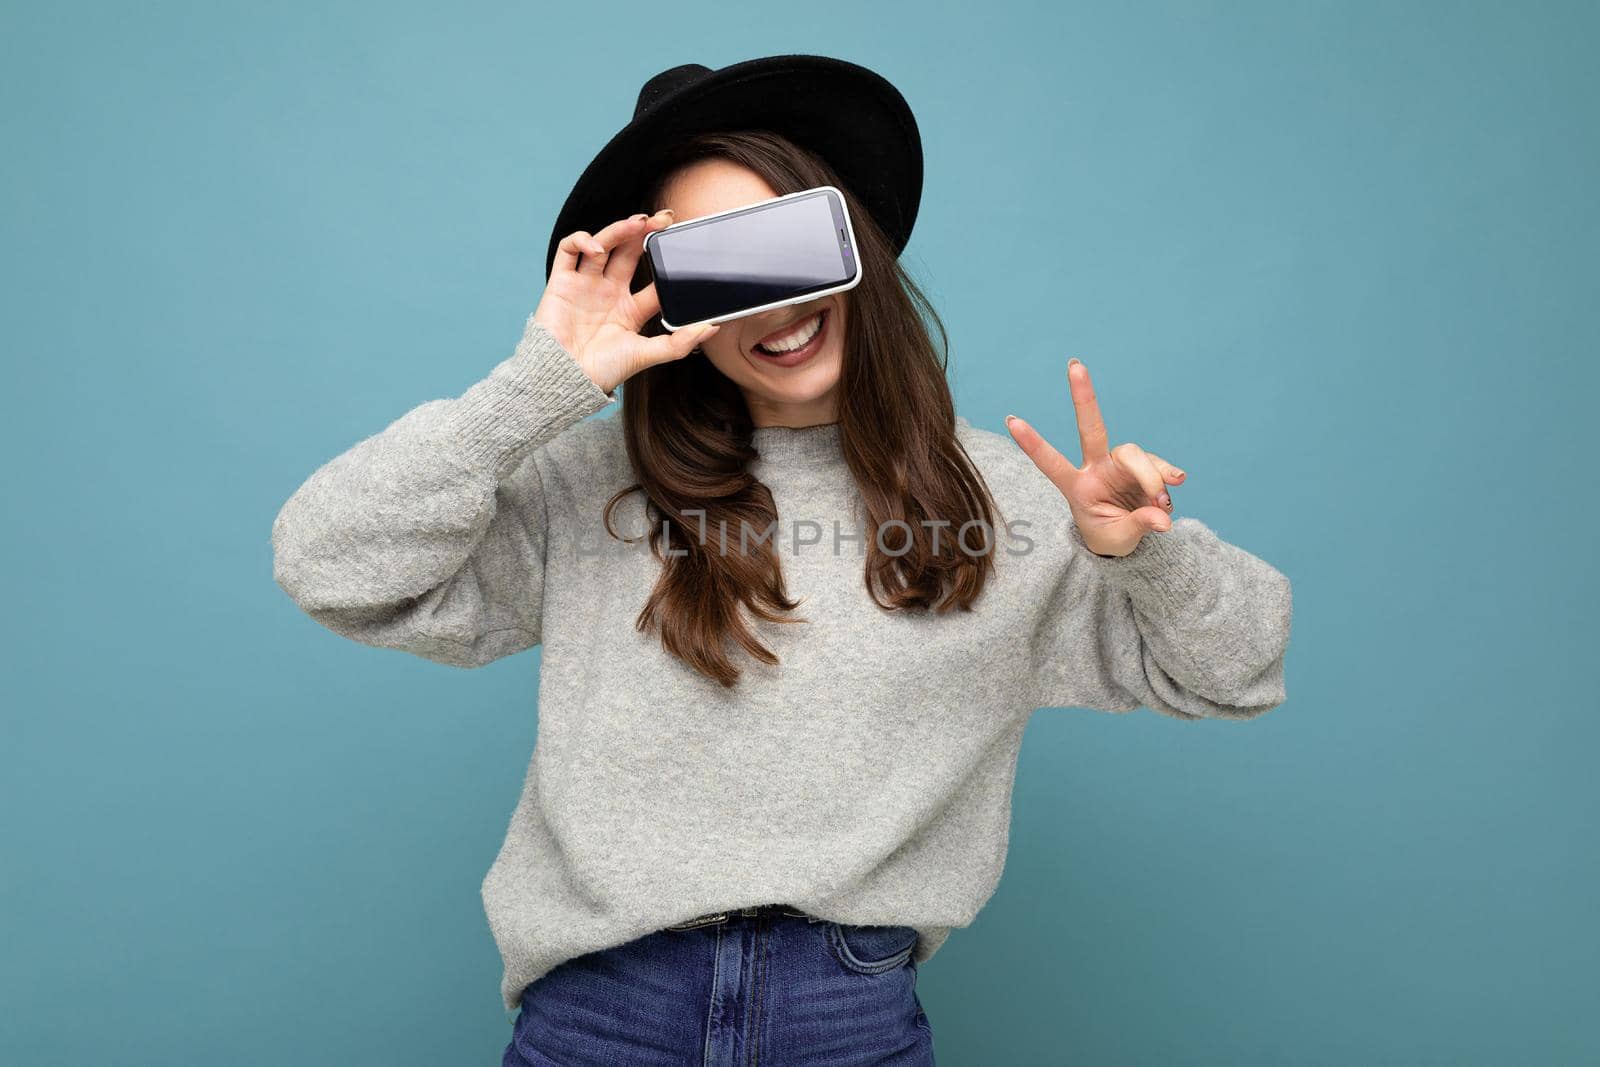 Pretty positive young female person wearing black hat and grey sweater holding phone showing smartphone isolated on background showing peace gesture by TRMK